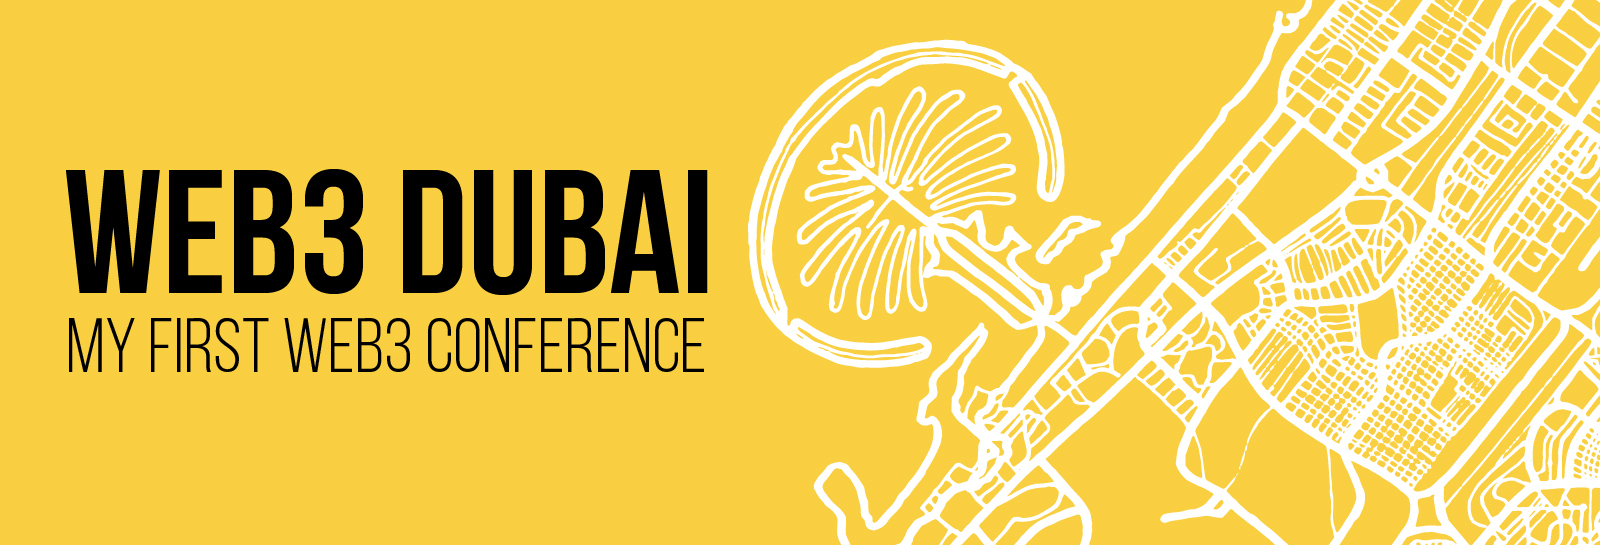 Blog banner for web3 Dubai - My first web3 conference